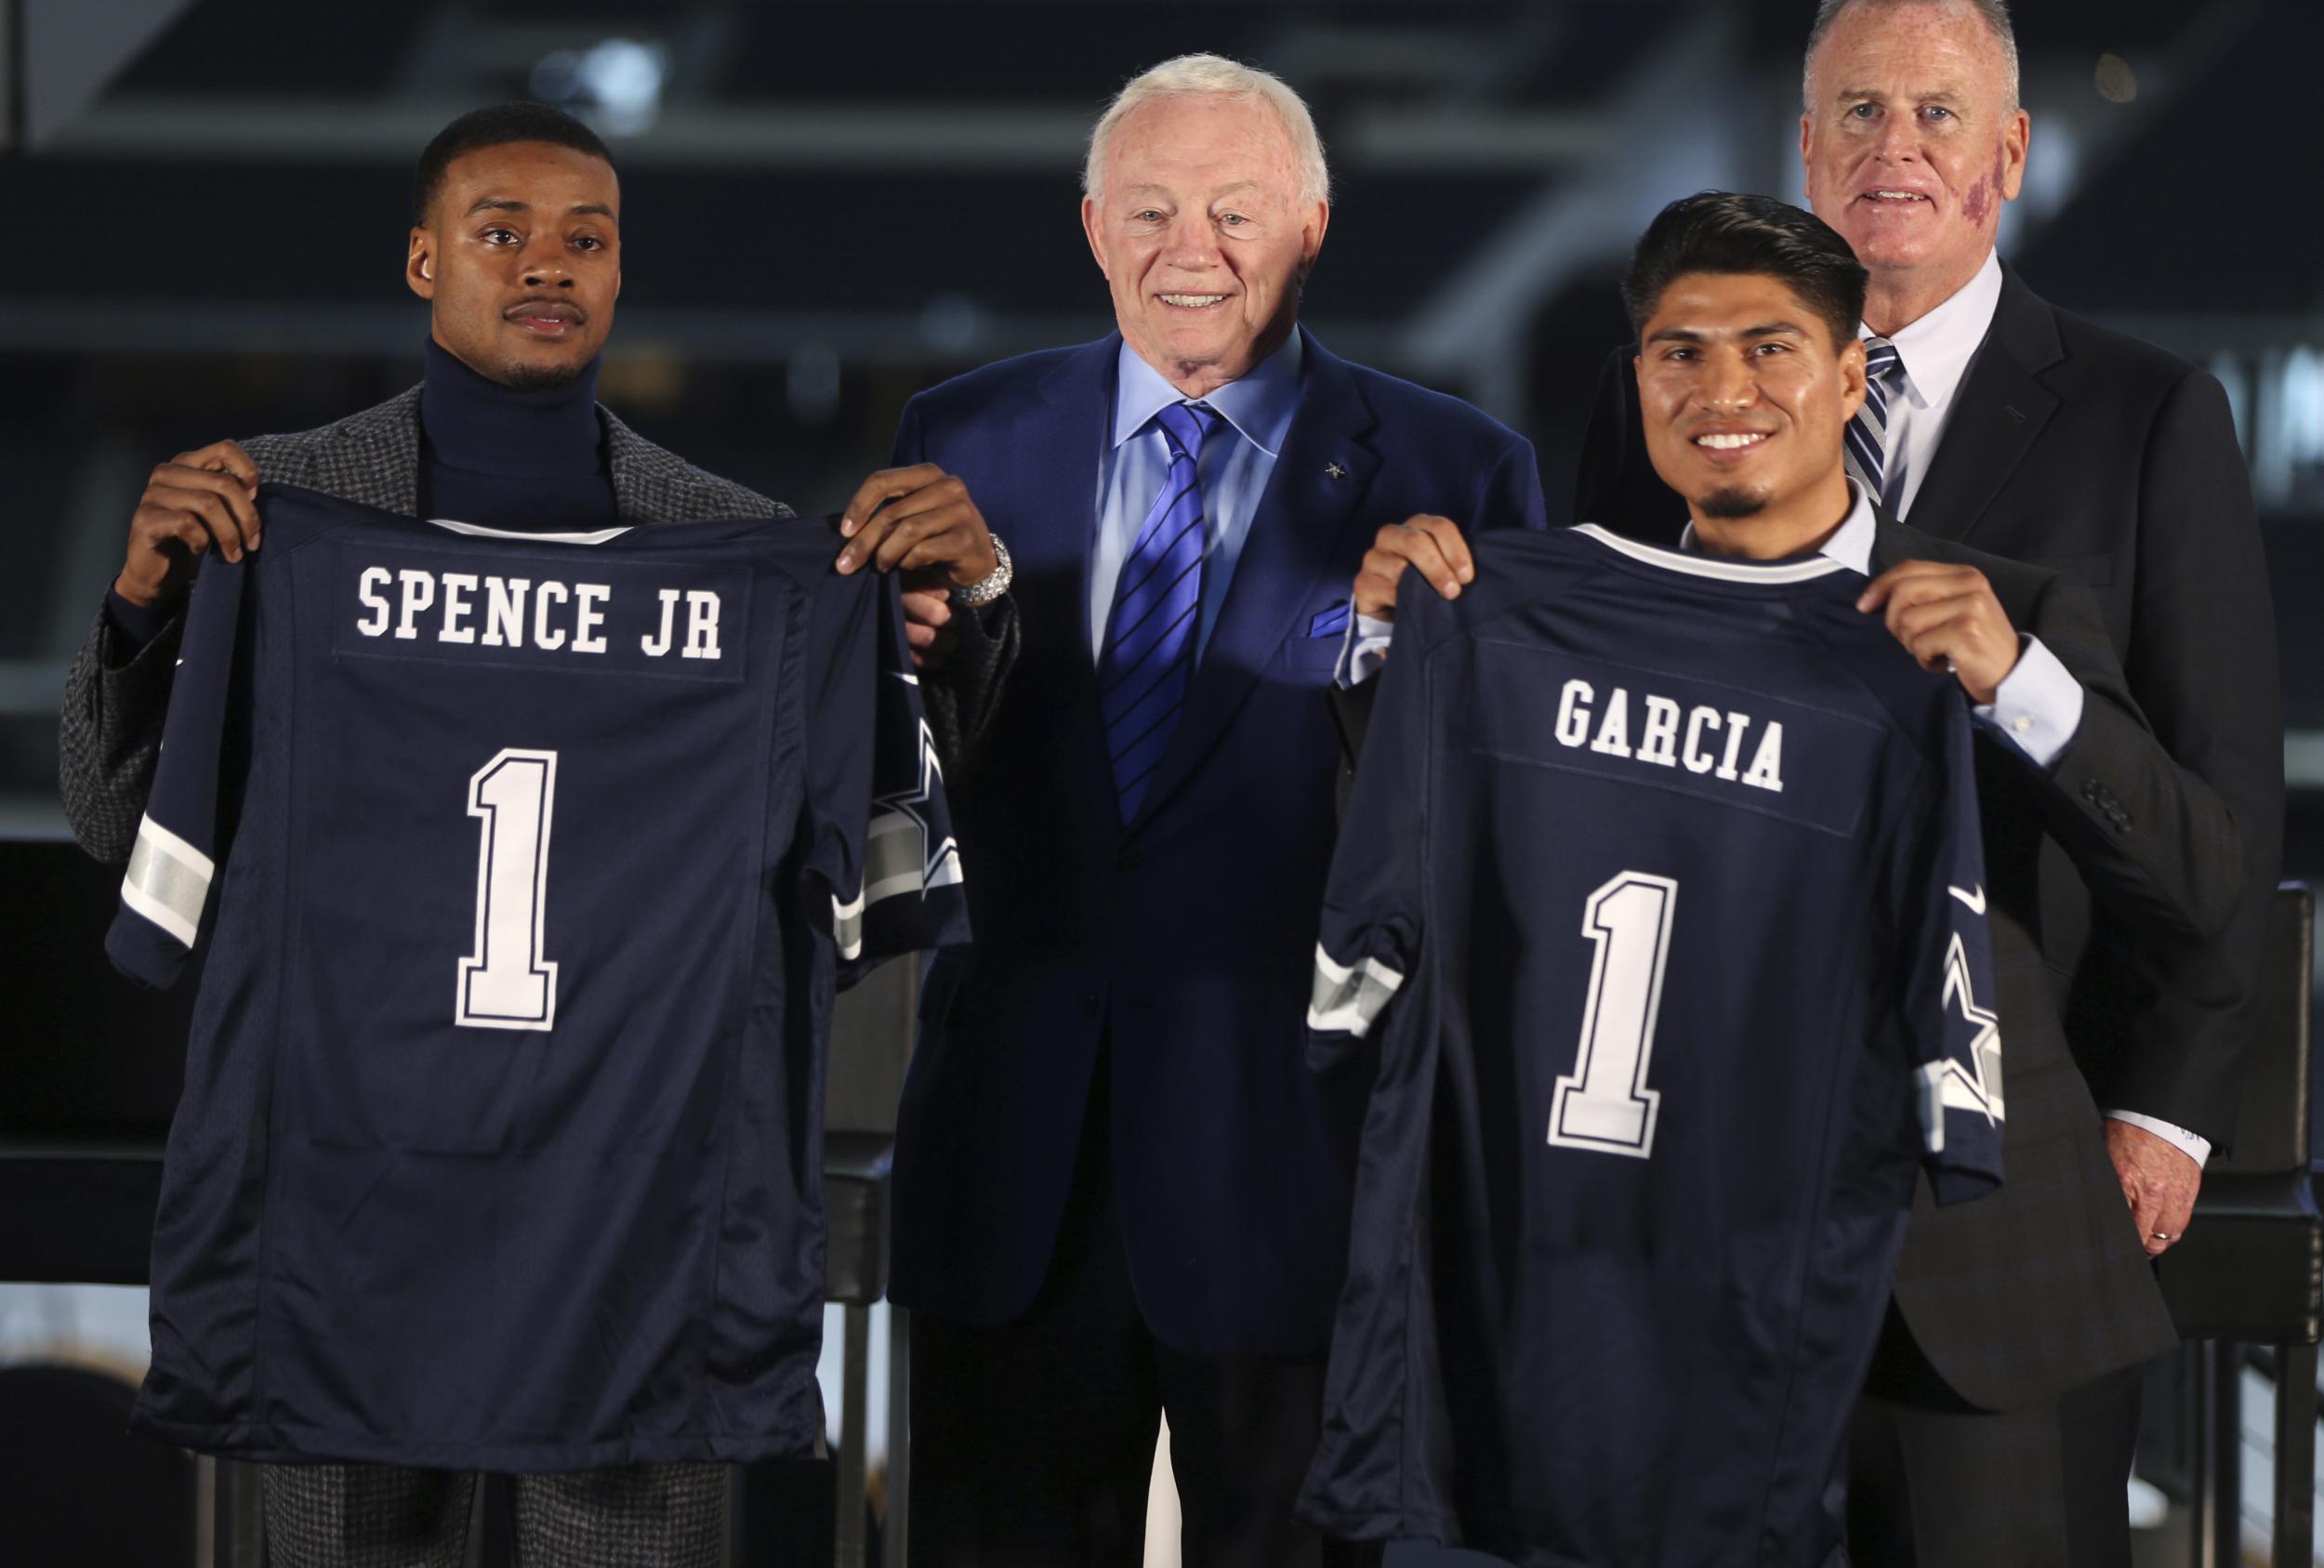 The undefeated fighters pose with Dallas Cowboys shirts